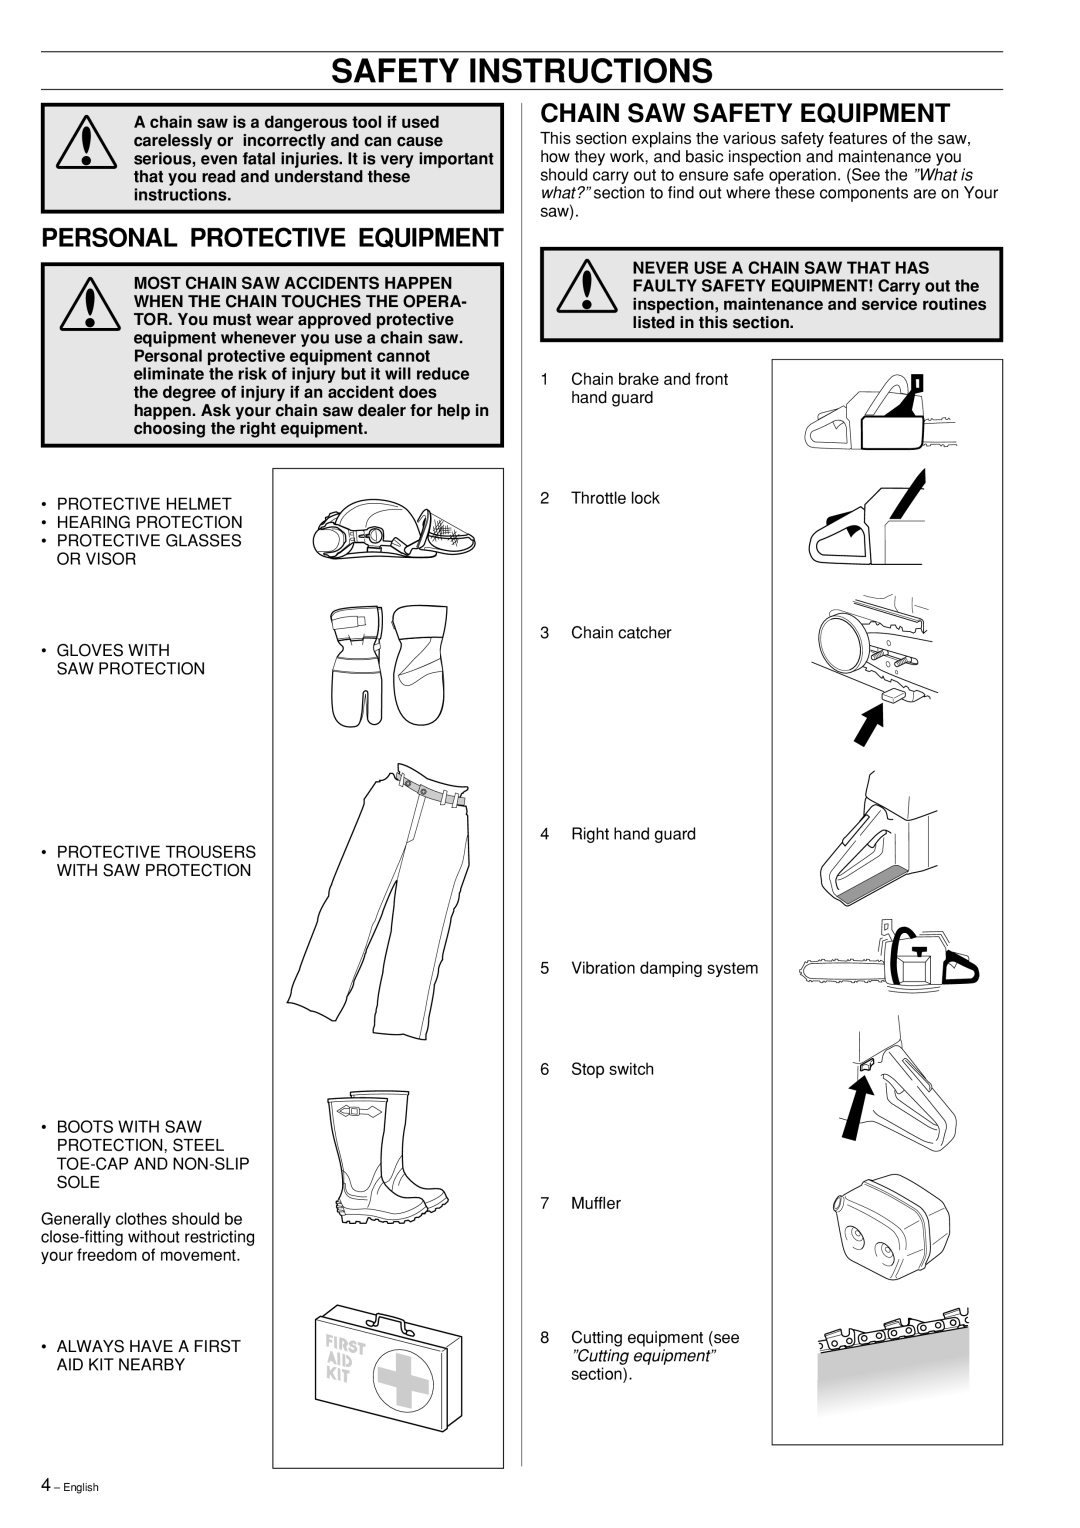 Husqvarna 55 Rancher manual Safety Instructions, Personal Protective Equipment, Chain Saw Safety Equipment 